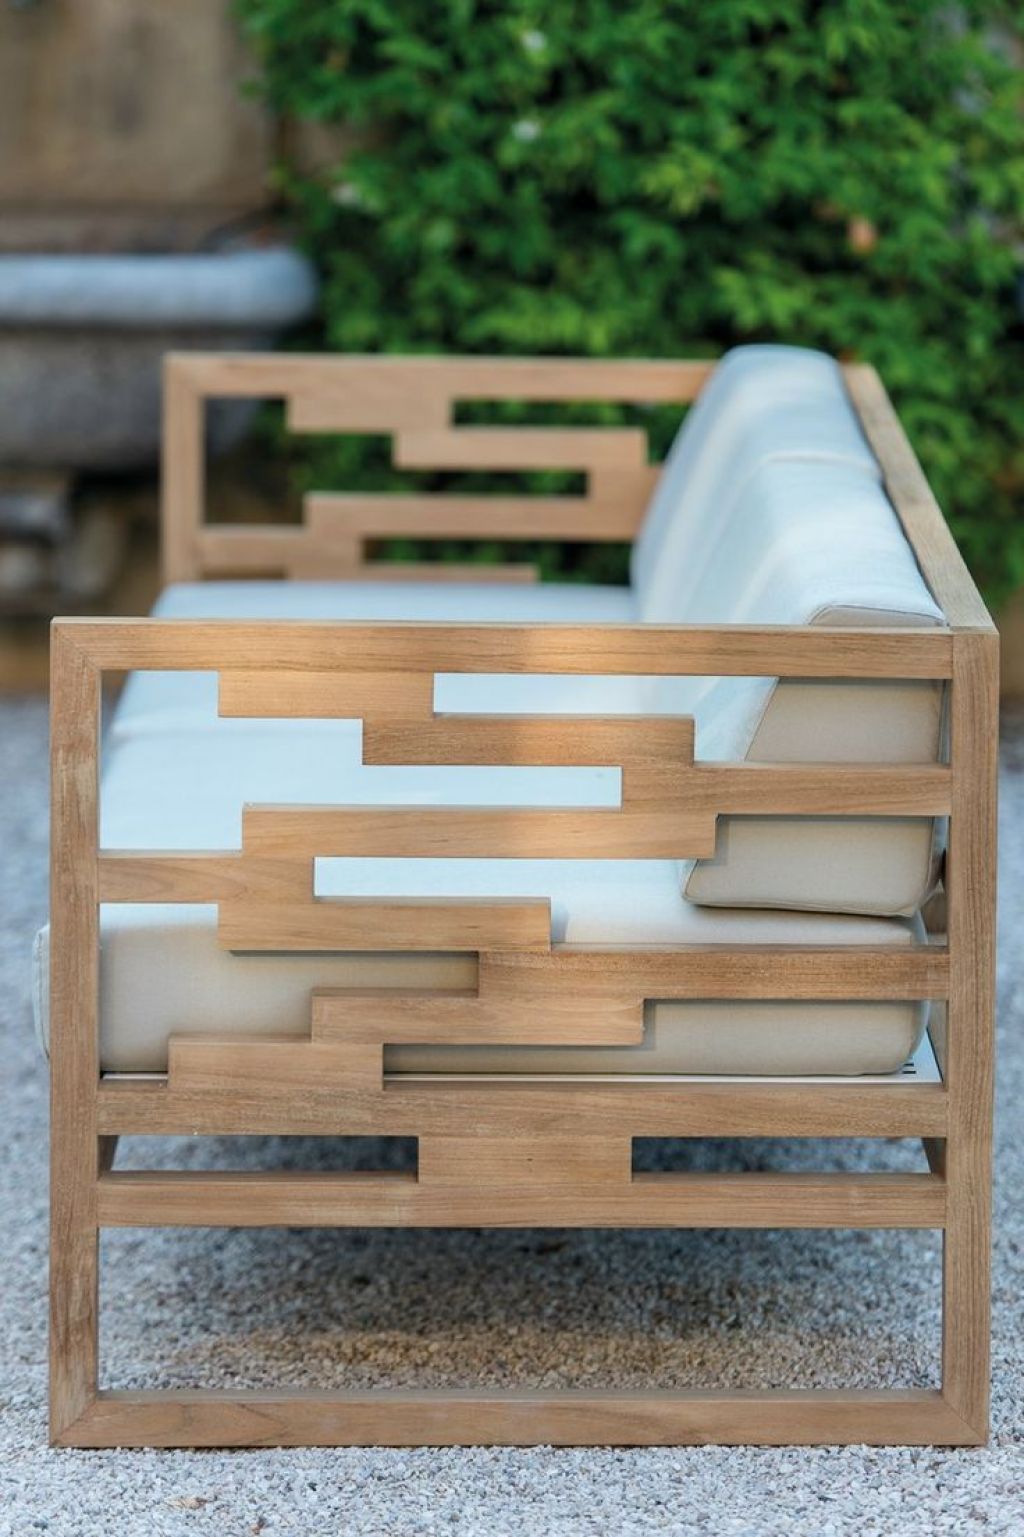 How To Protect Your Teak Furniture From Weather Damage